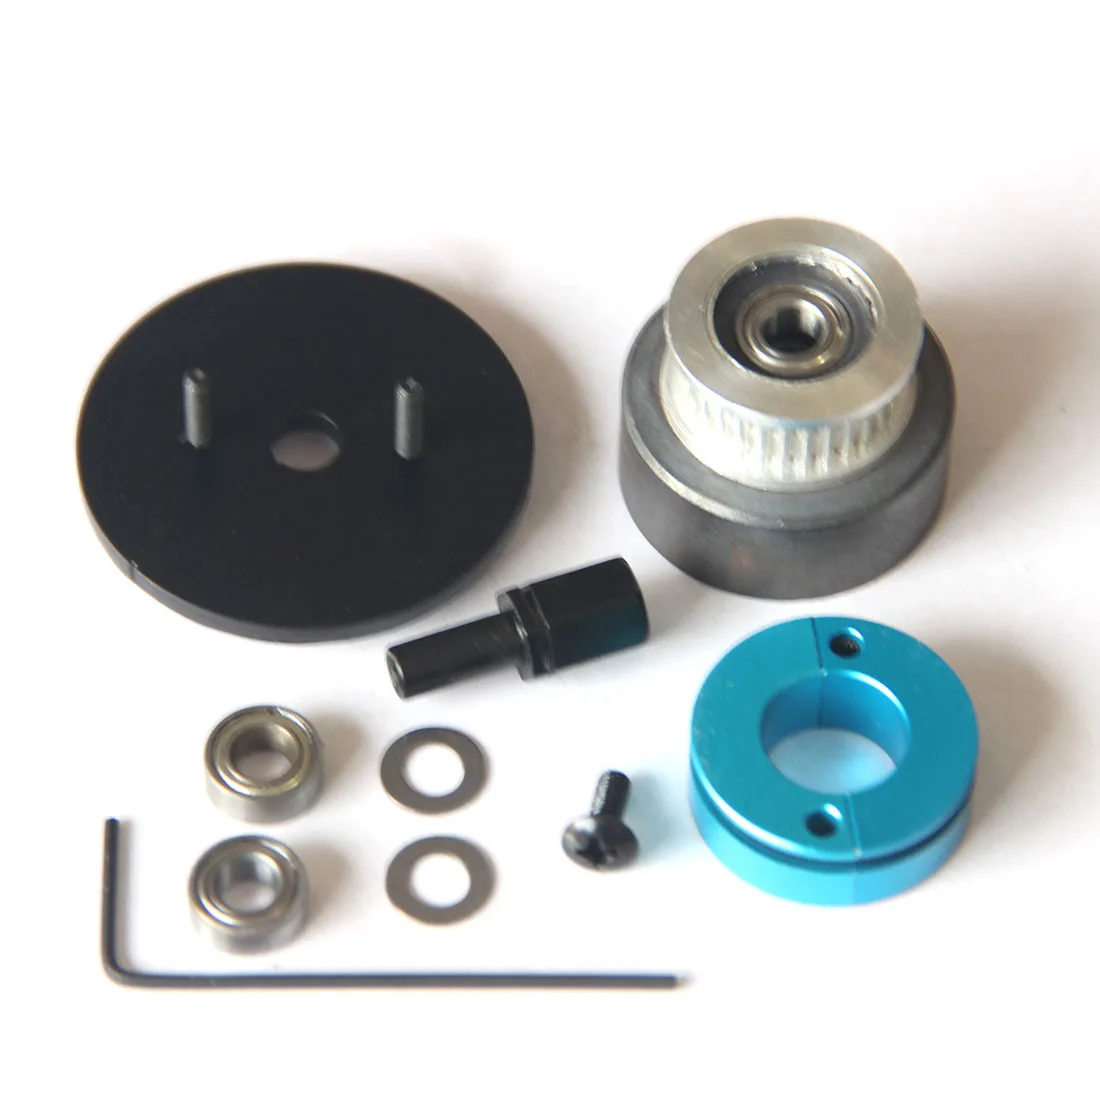 Single Synchronous Pulley Clutch Assembly Kit For Toyan FS-L200 Two-Cylinder Four-Stroke Methanol Engine Model For Children Toys